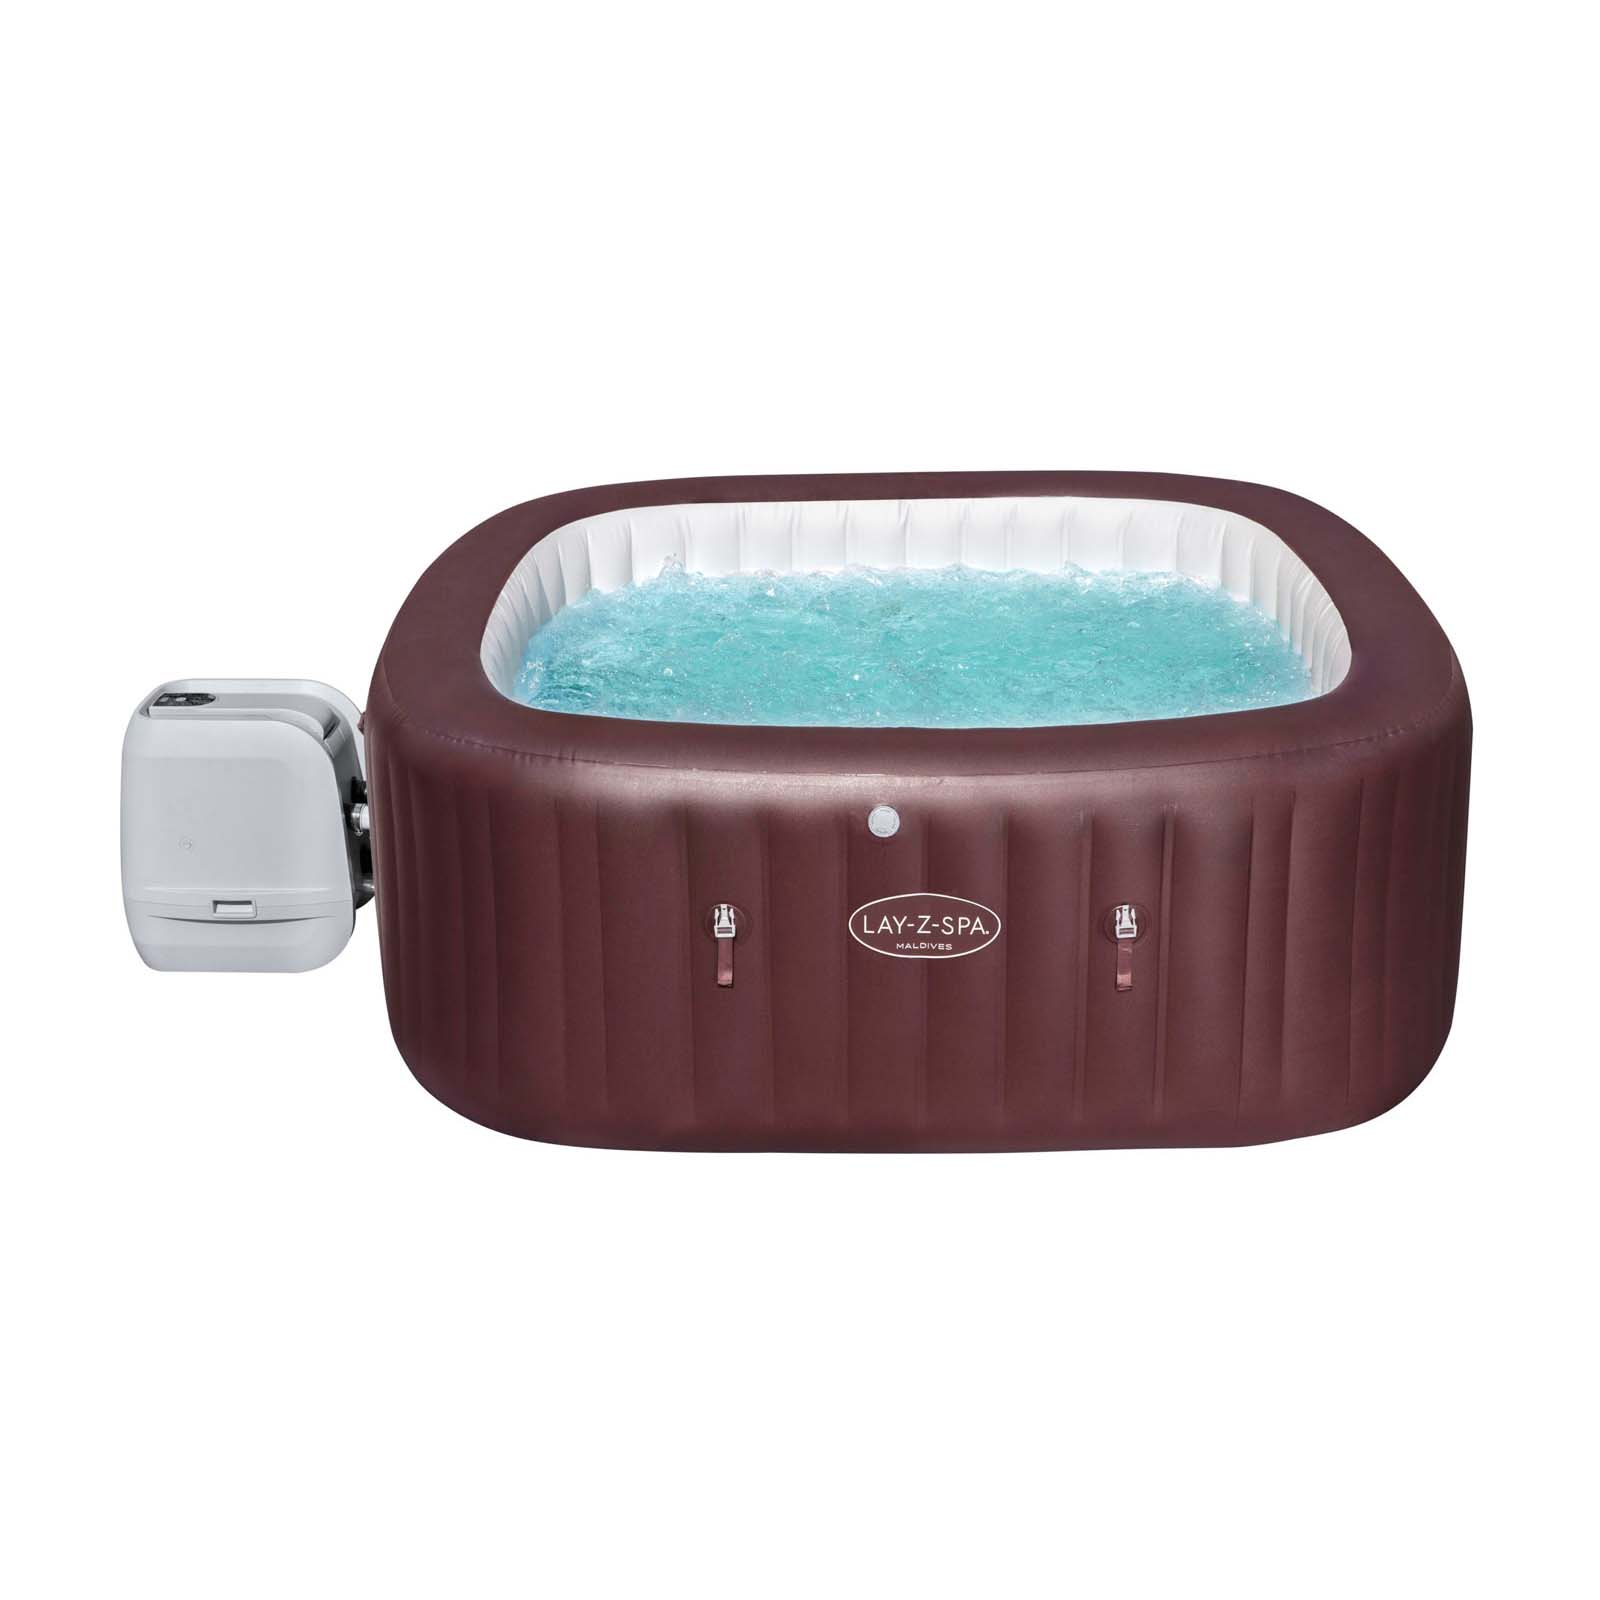 Spa inflable con luces LED ColorJet para 5-7 personas Lay-Z-Spa Maldivas HydroJet Pro